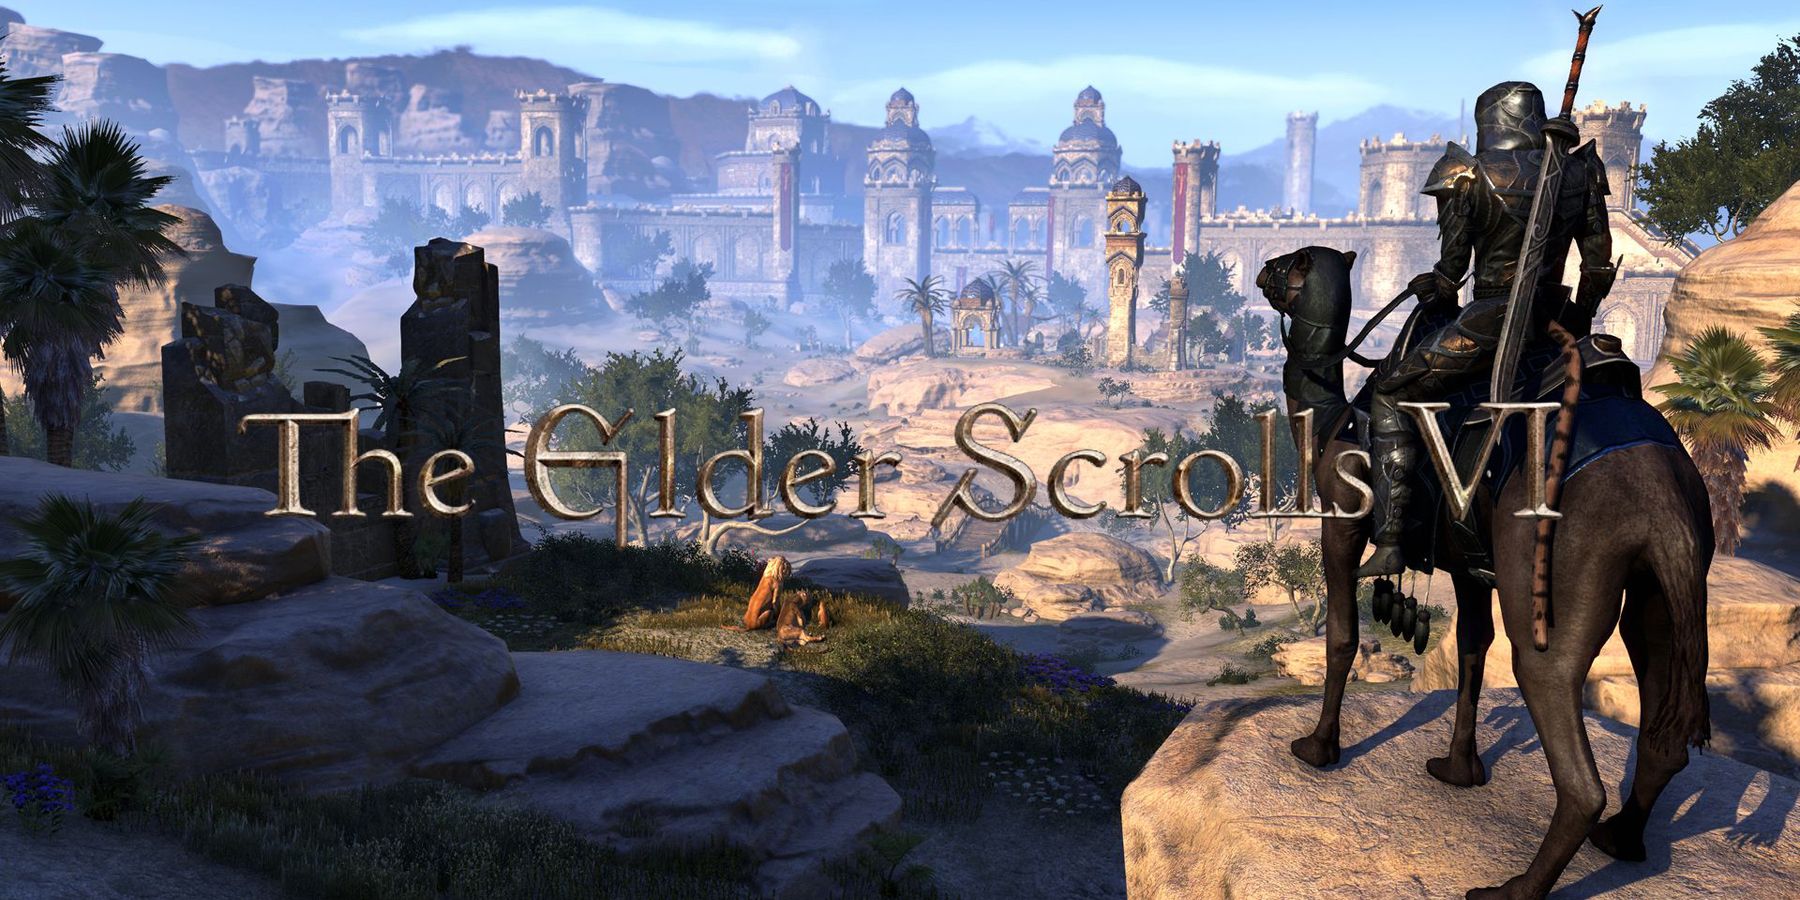 ELDER SCROLLS 6 FIRST CHARACTER REVEALED, UNREAL ENGINE 4 SHOWS